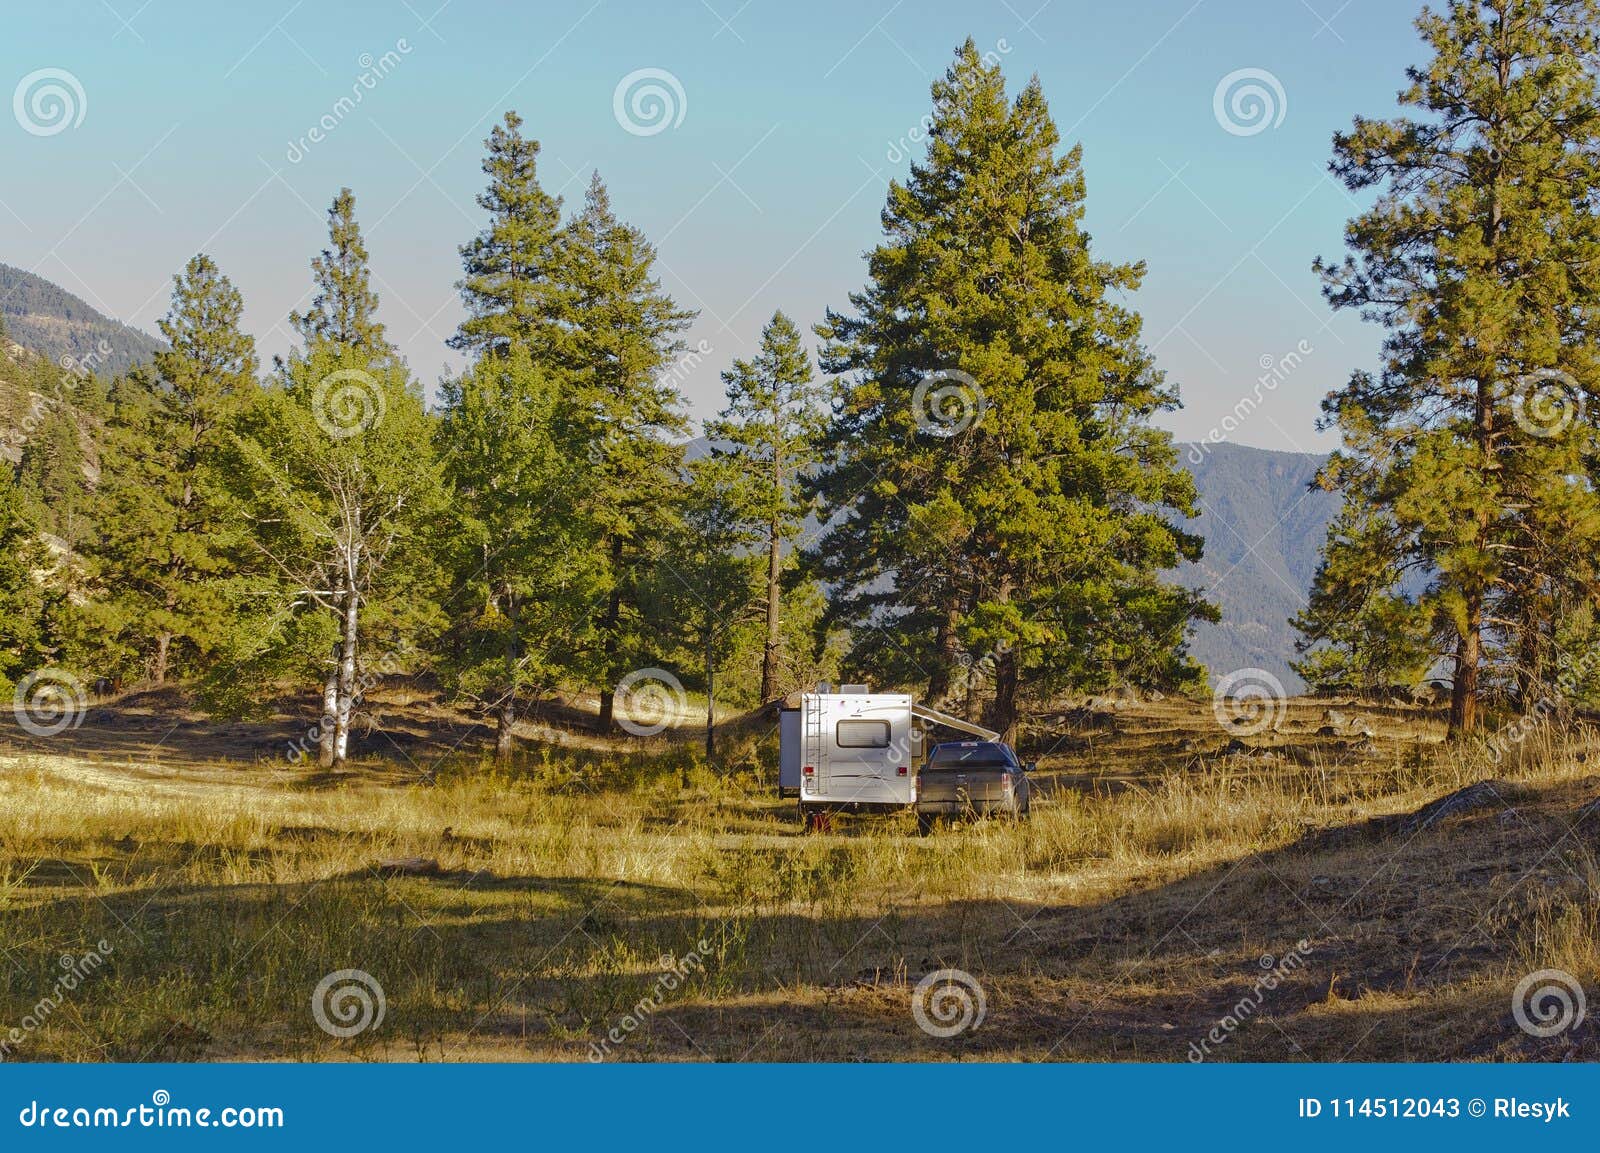 Camper Set Up In A Meadow In A Pine Forest Stock Image